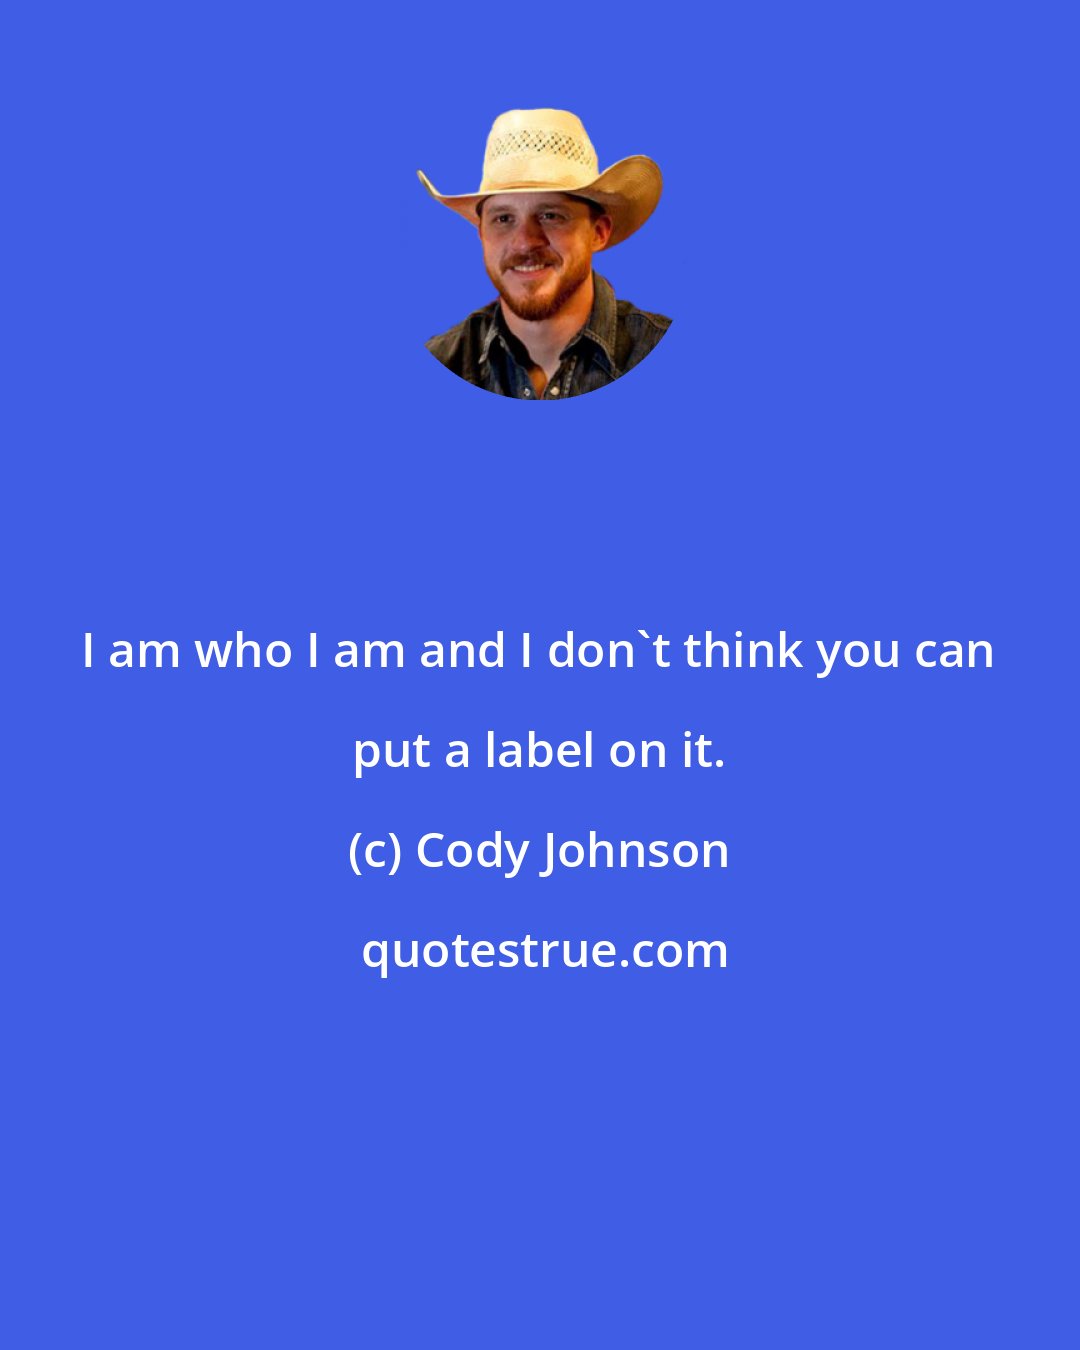 Cody Johnson: I am who I am and I don't think you can put a label on it.